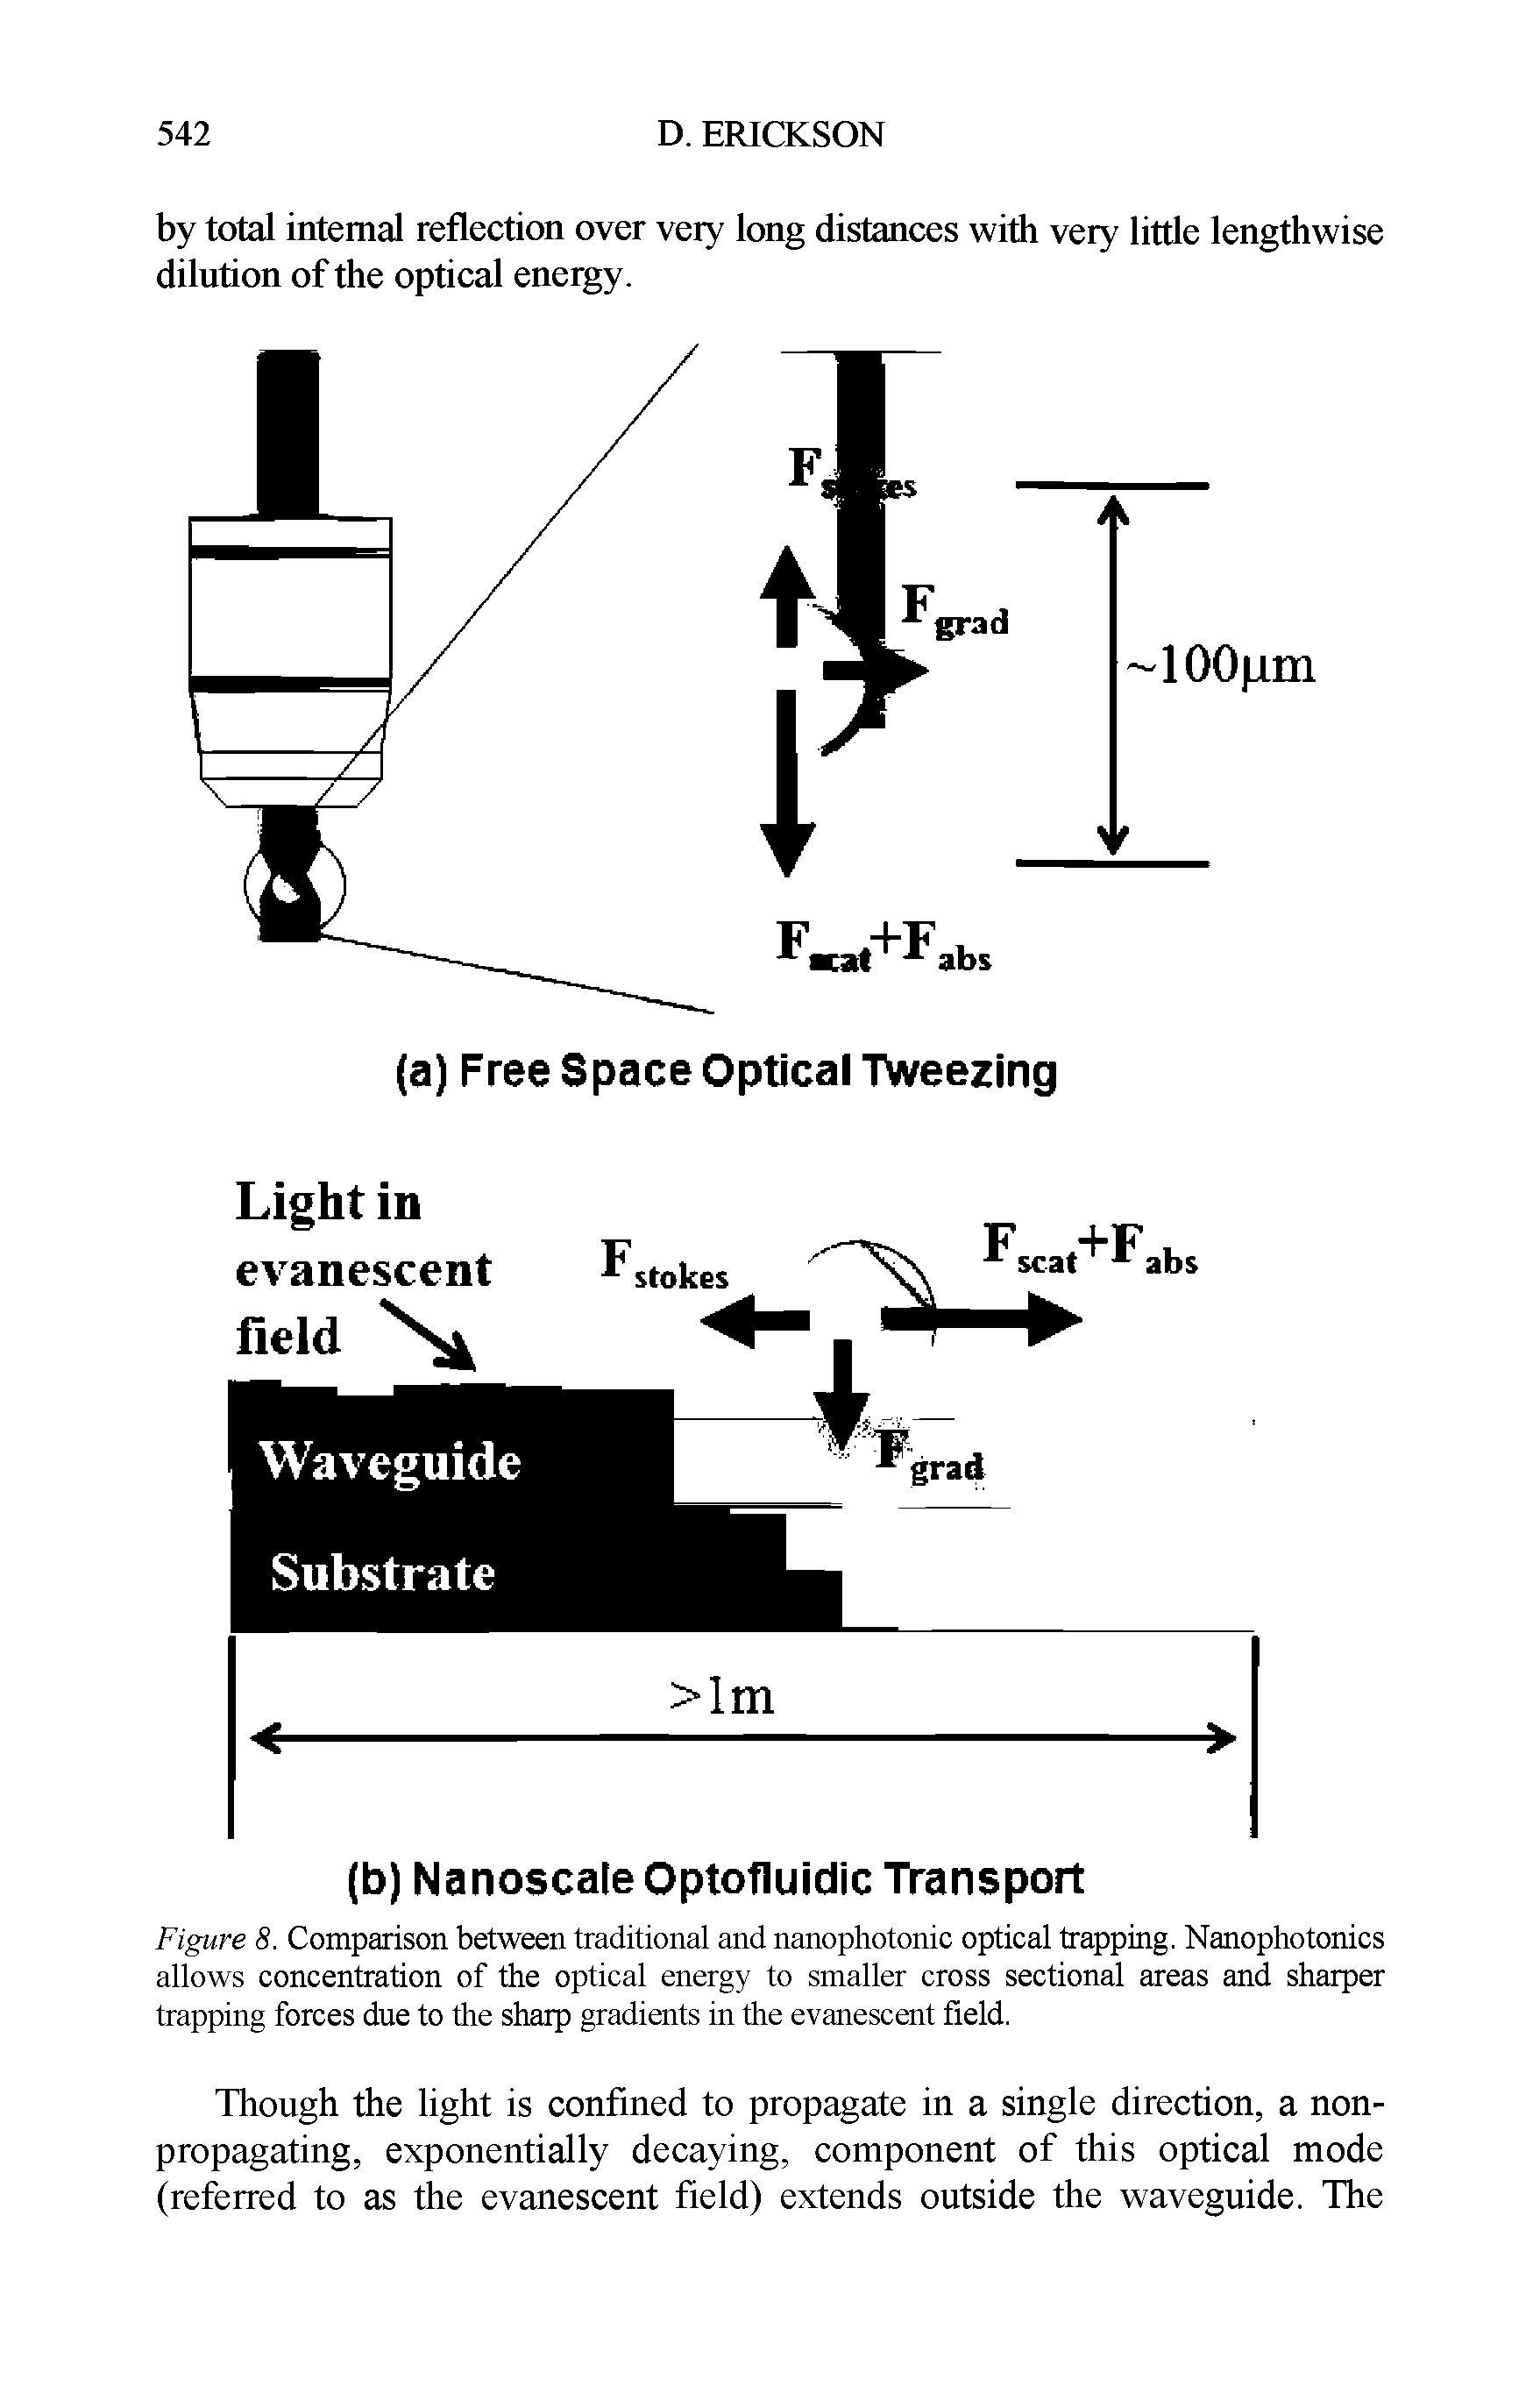 Figure 8. Comparison between traditional and nanophotonic optical trapping. Nanophotonics allows concentration of the optical energy to smaller cross sectional areas and sharper trapping forces due to the sharp gradients in the evanescent field.